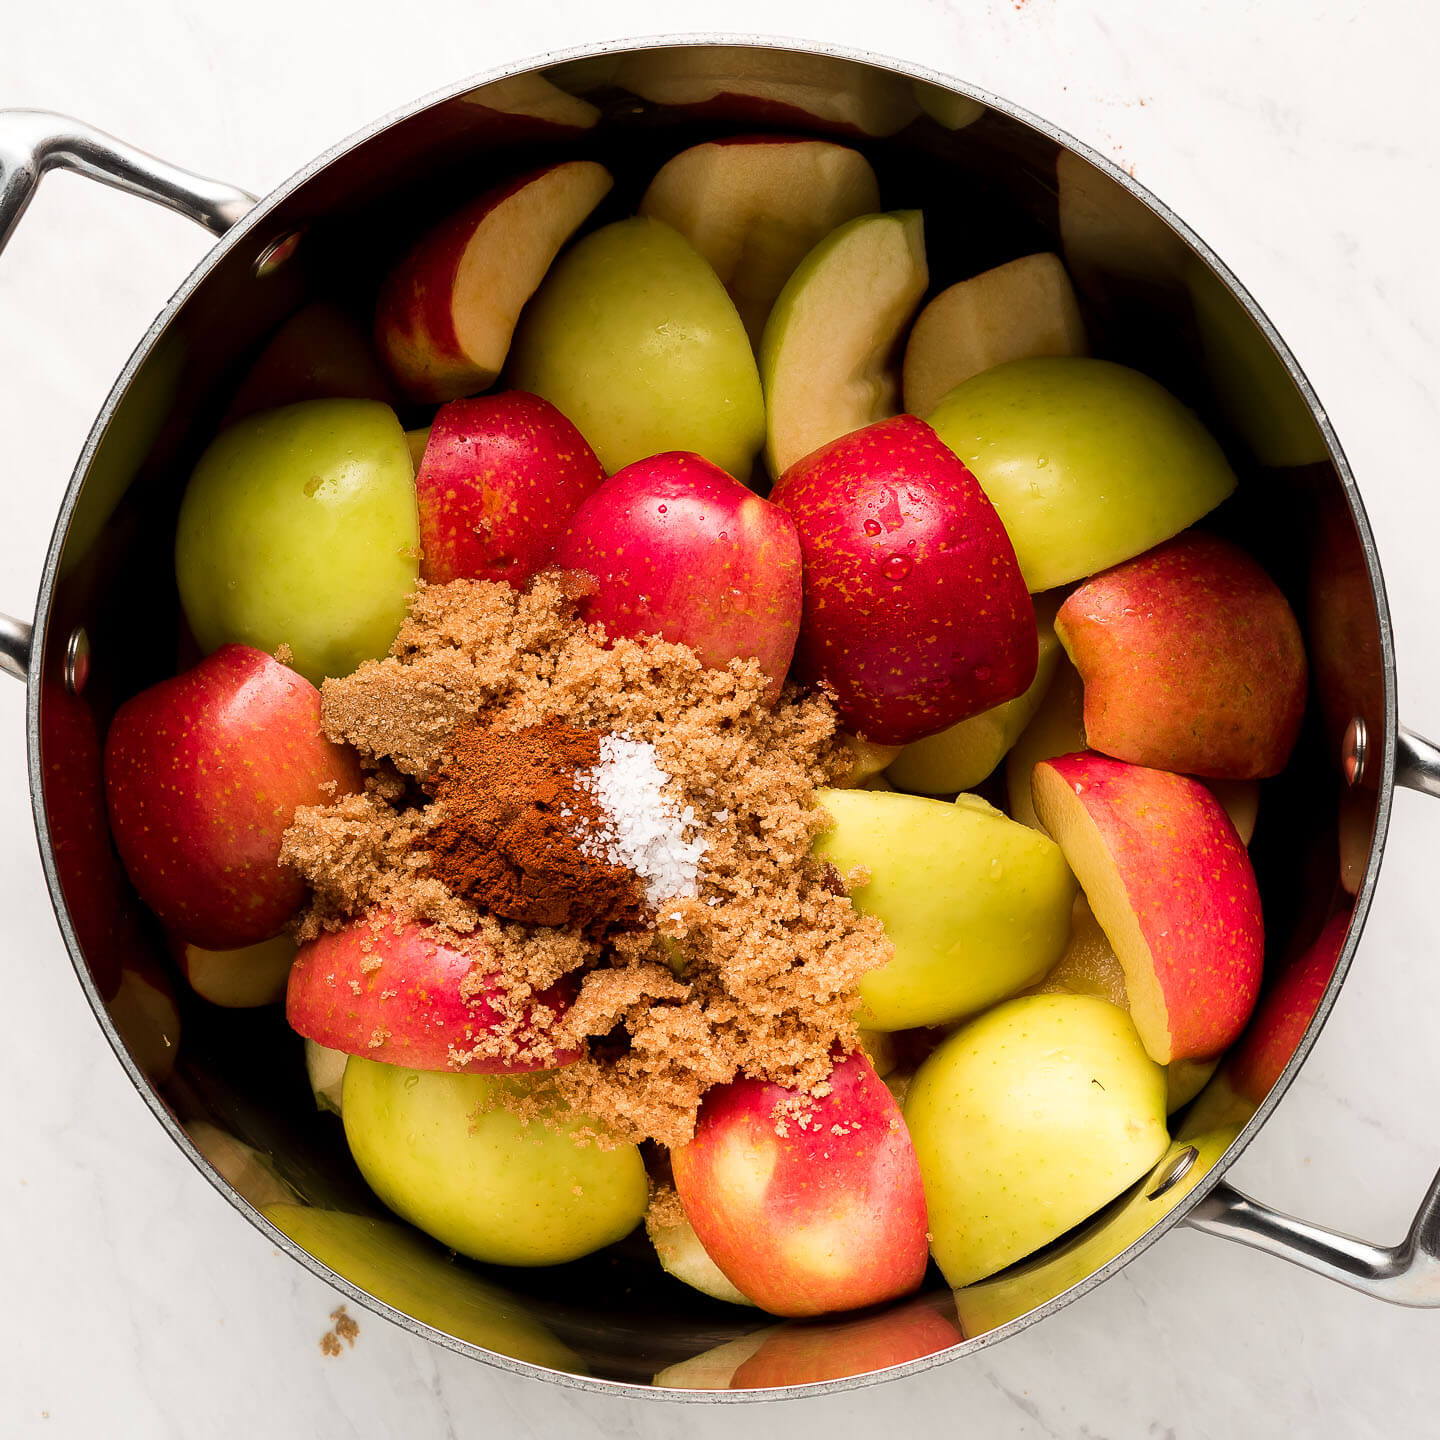 Apple quarters in a pot with sugar and spices.